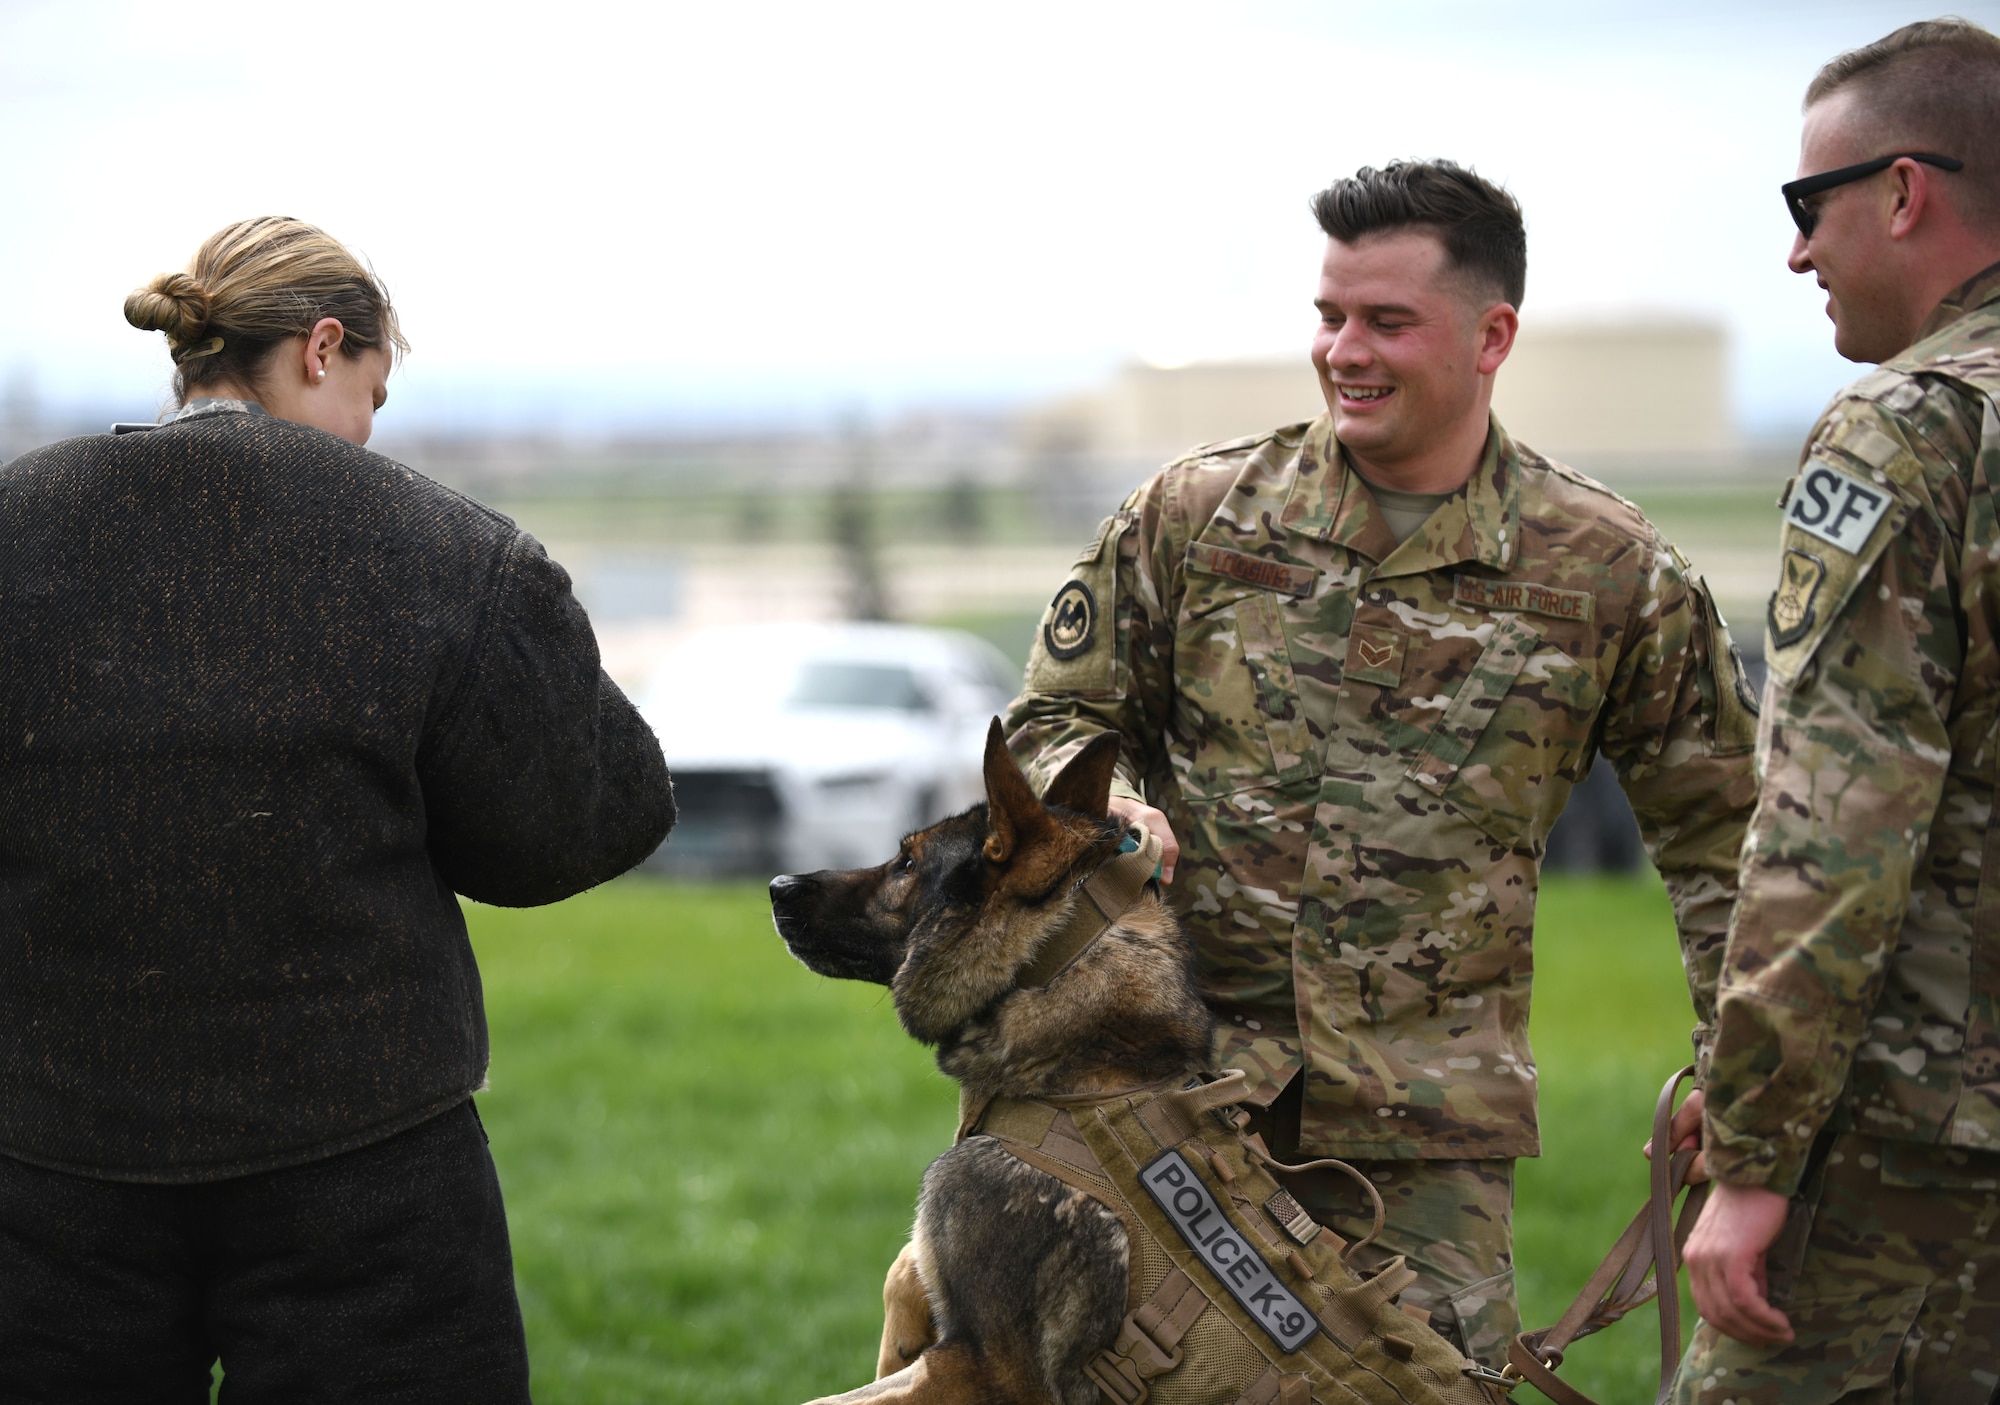 Senior Airman Chase Loggins, a 28th Security Forces Squadron military working dog handler, restrains MWD Boris during a demonstration for National Police Week on Ellsworth Air Force Base, S.D., May 16, 2019. The 28th SFS MWD competition was part of a series of events held in honor of law enforcement officers who died in the line of duty. (U.S. Air Force photo by Airman 1st Class Christina Bennett)